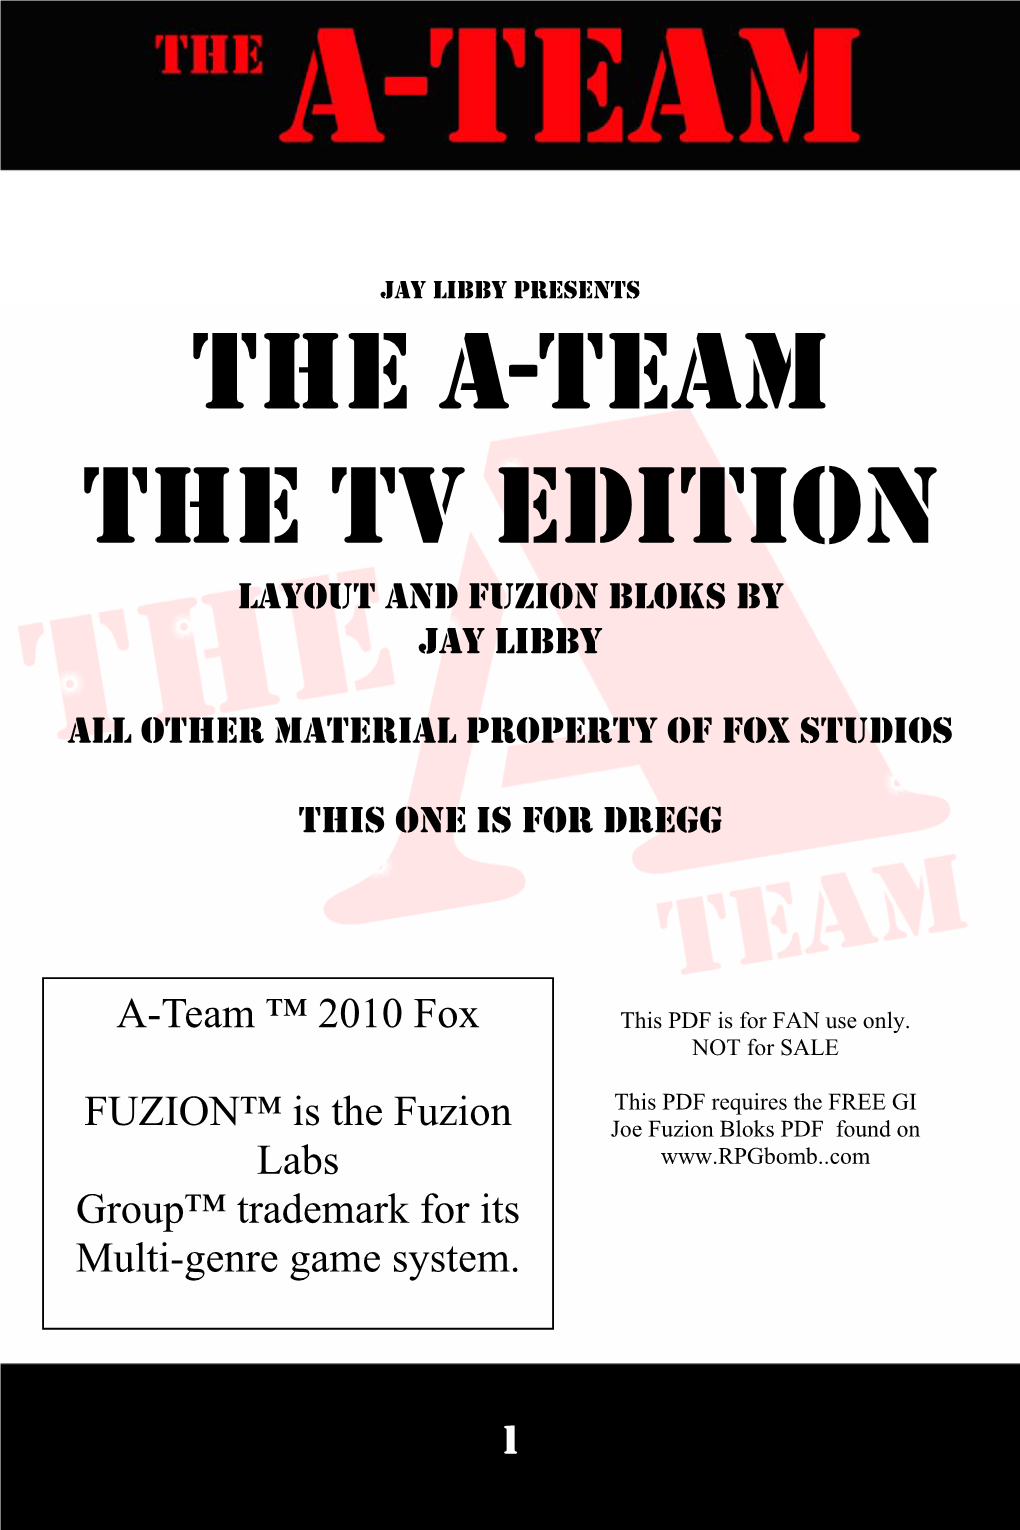 The A-Team the Tv Edition Layout and Fuzion Bloks by Jay Libby